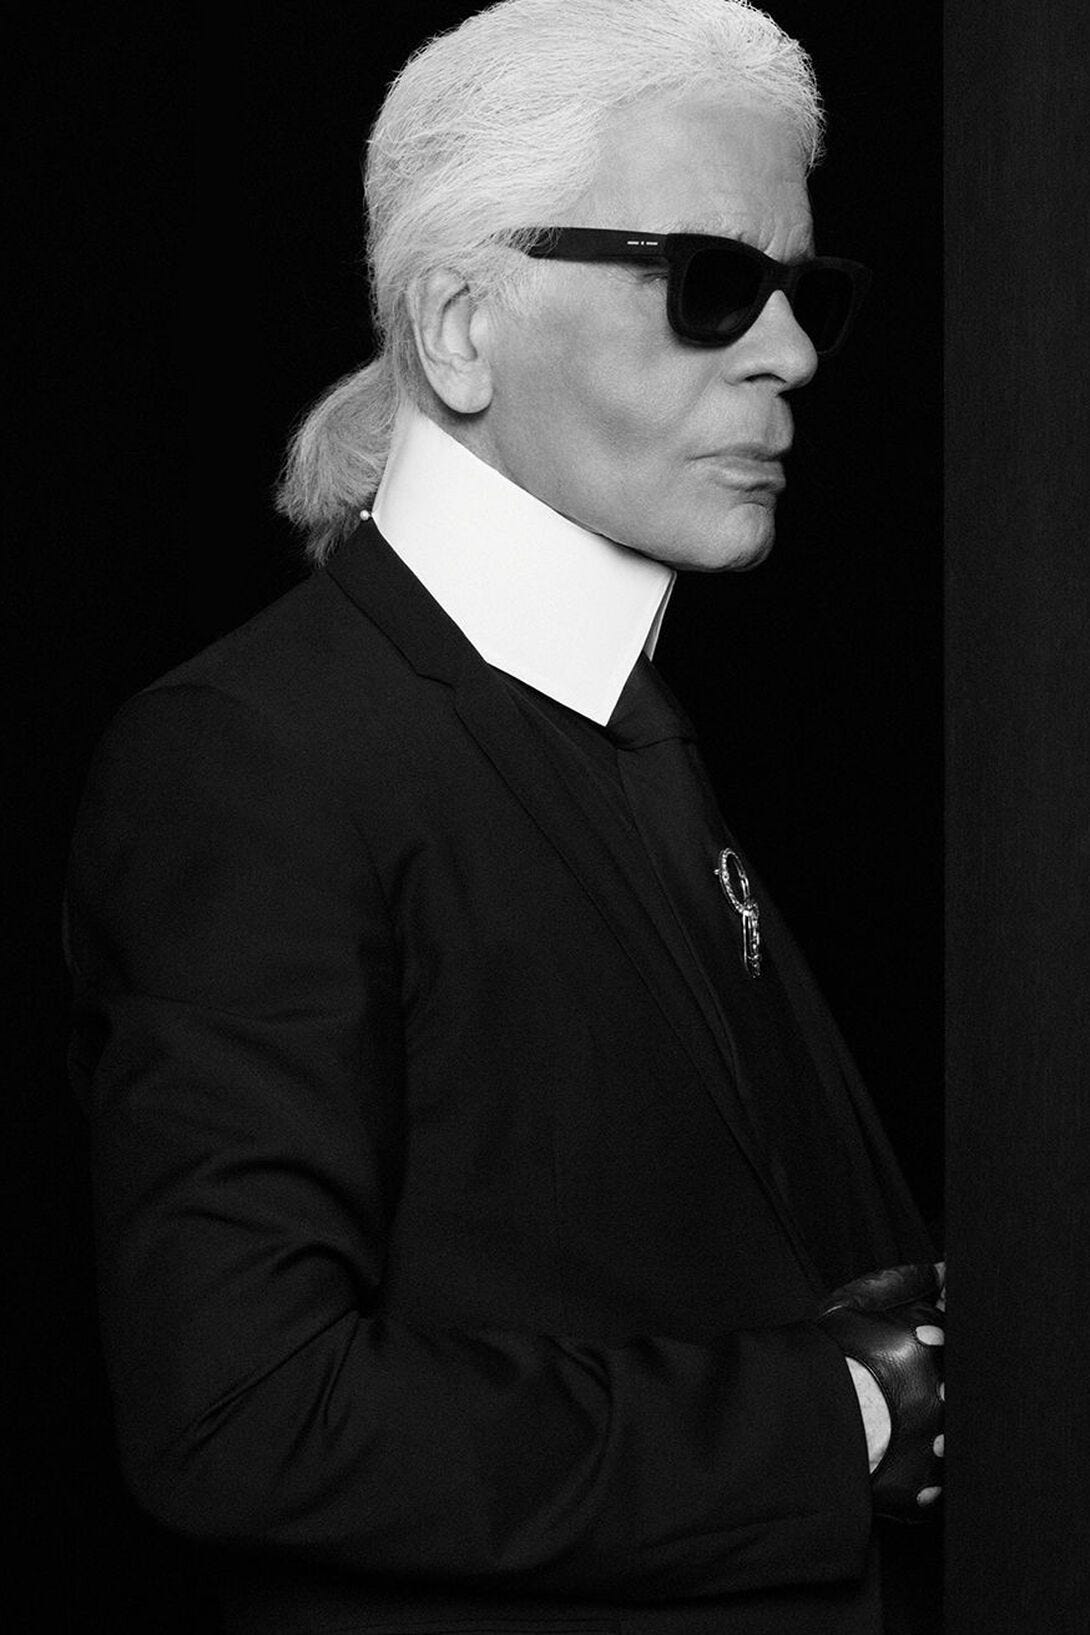 Karl Lagerfeld: Influential Even After His Death